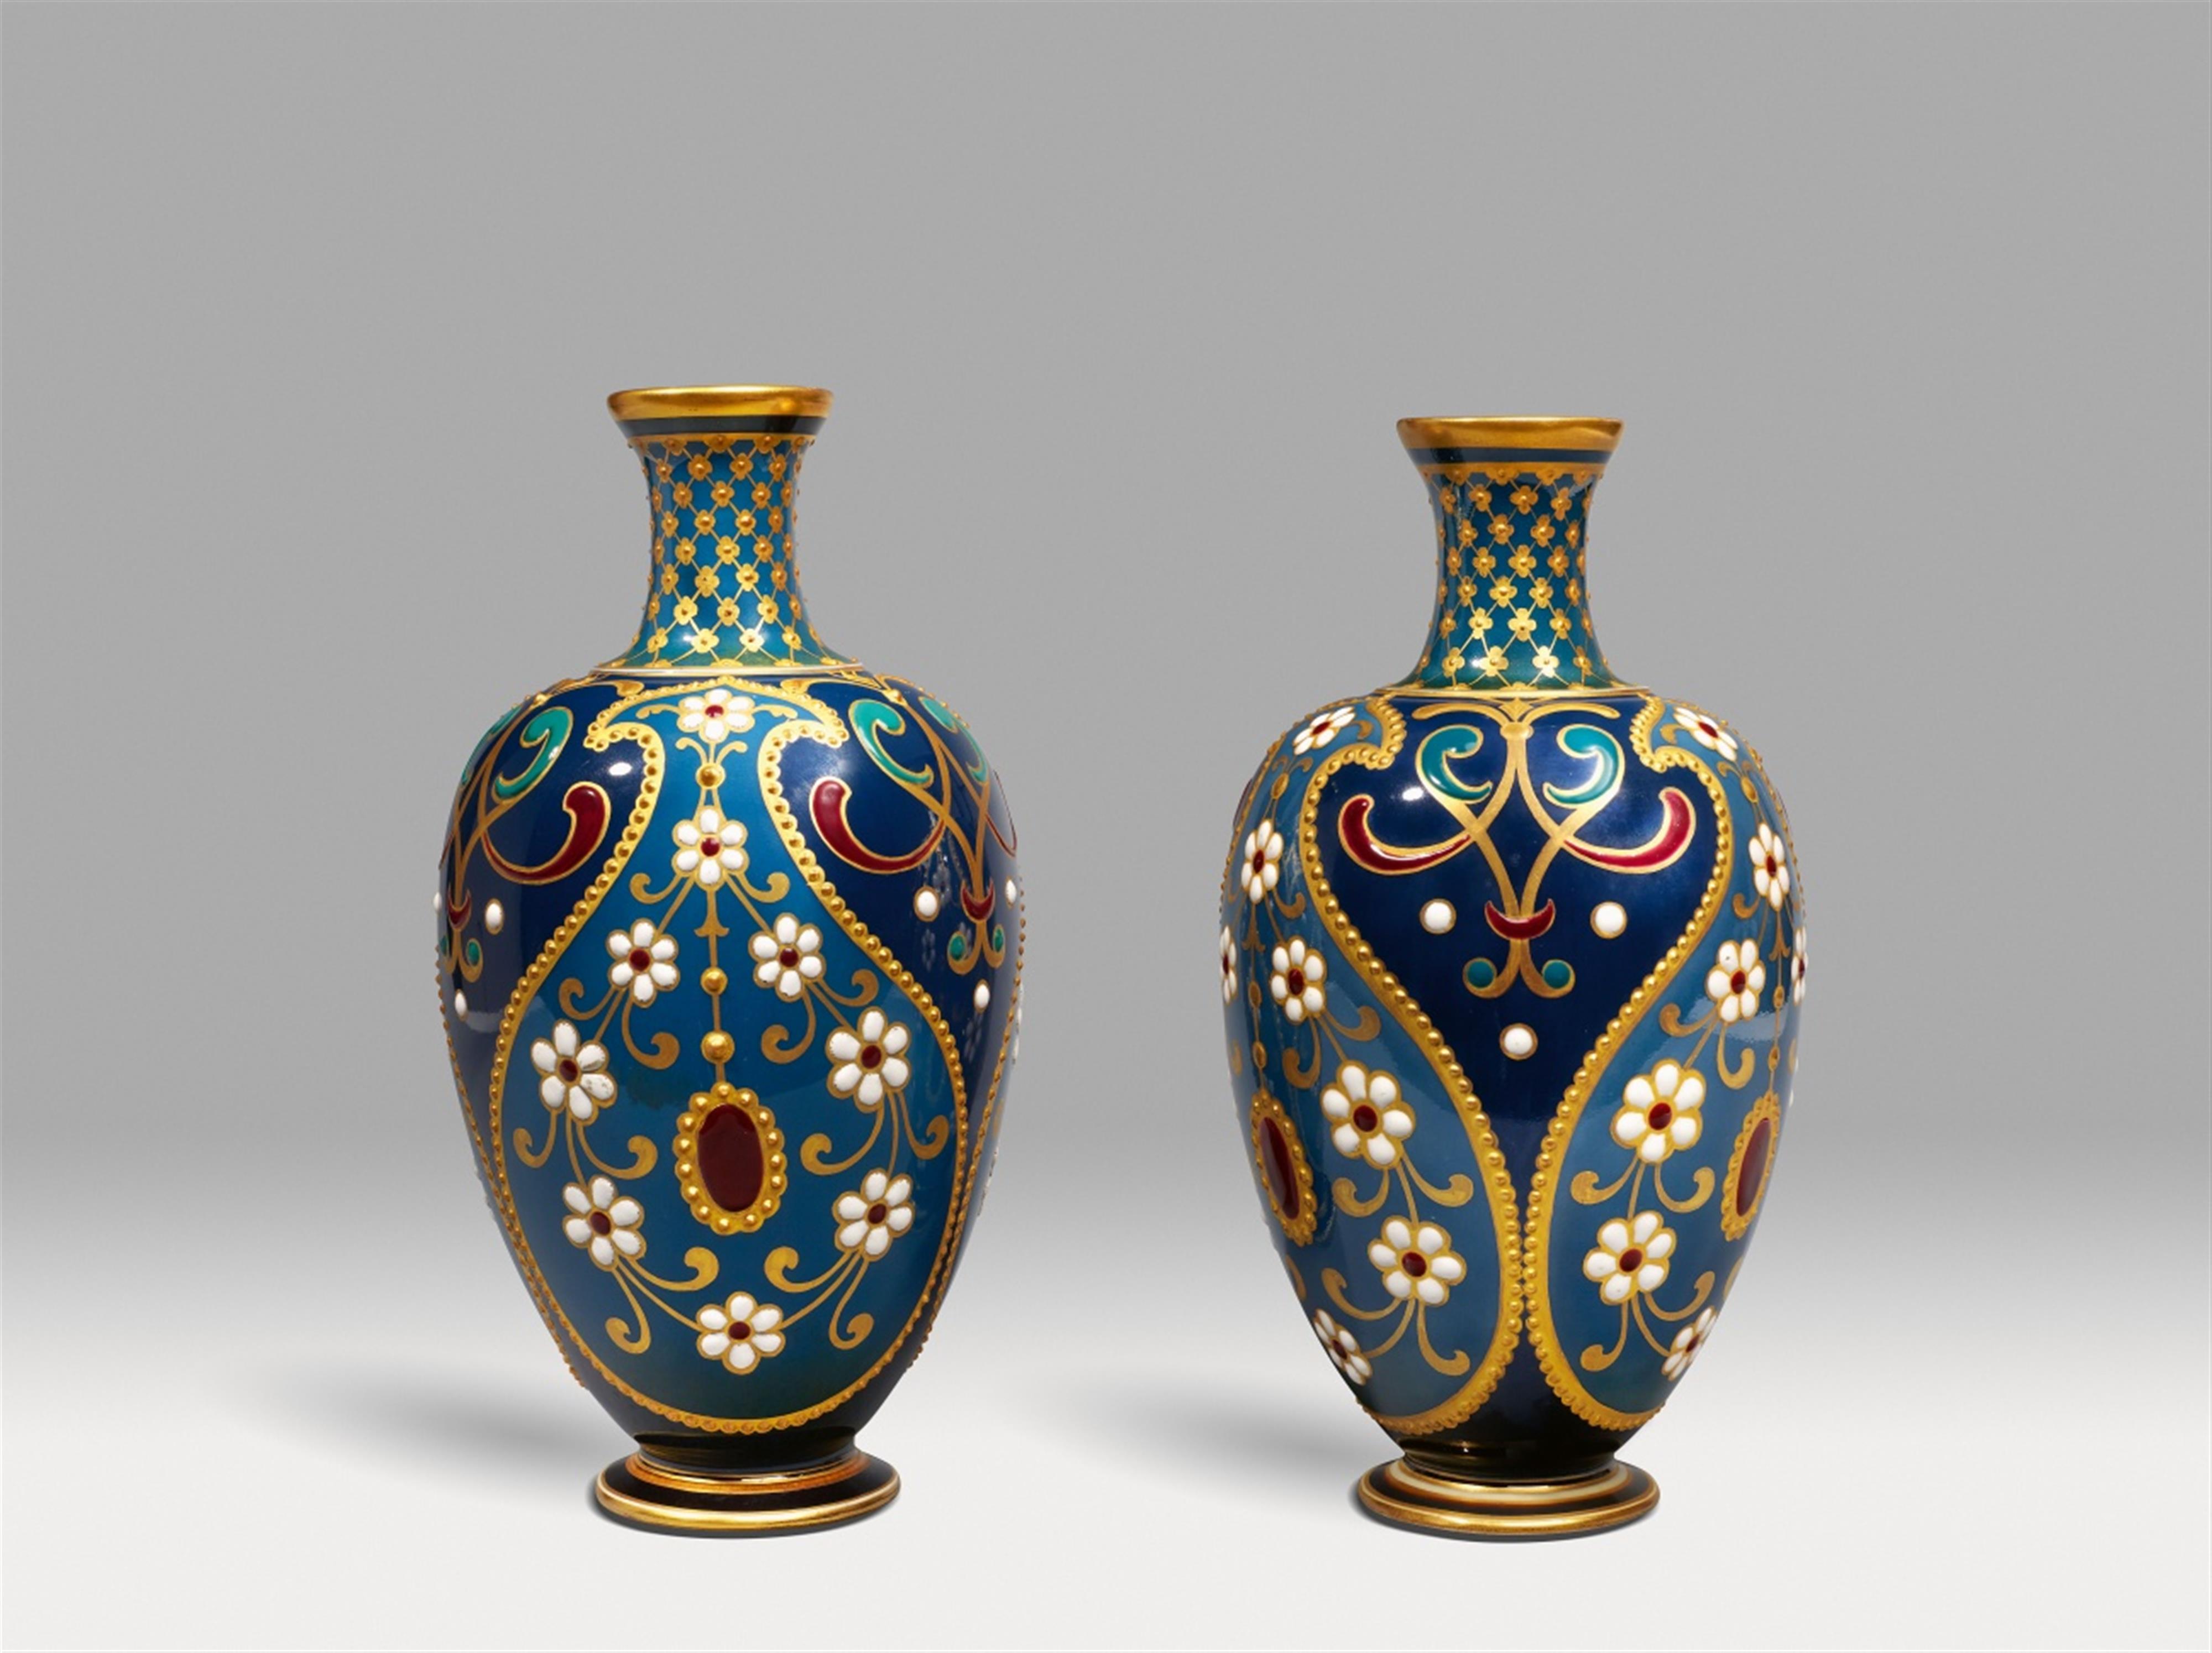 A pair of rare Berlin KPM porcelain vases with Persian style decor - image-1